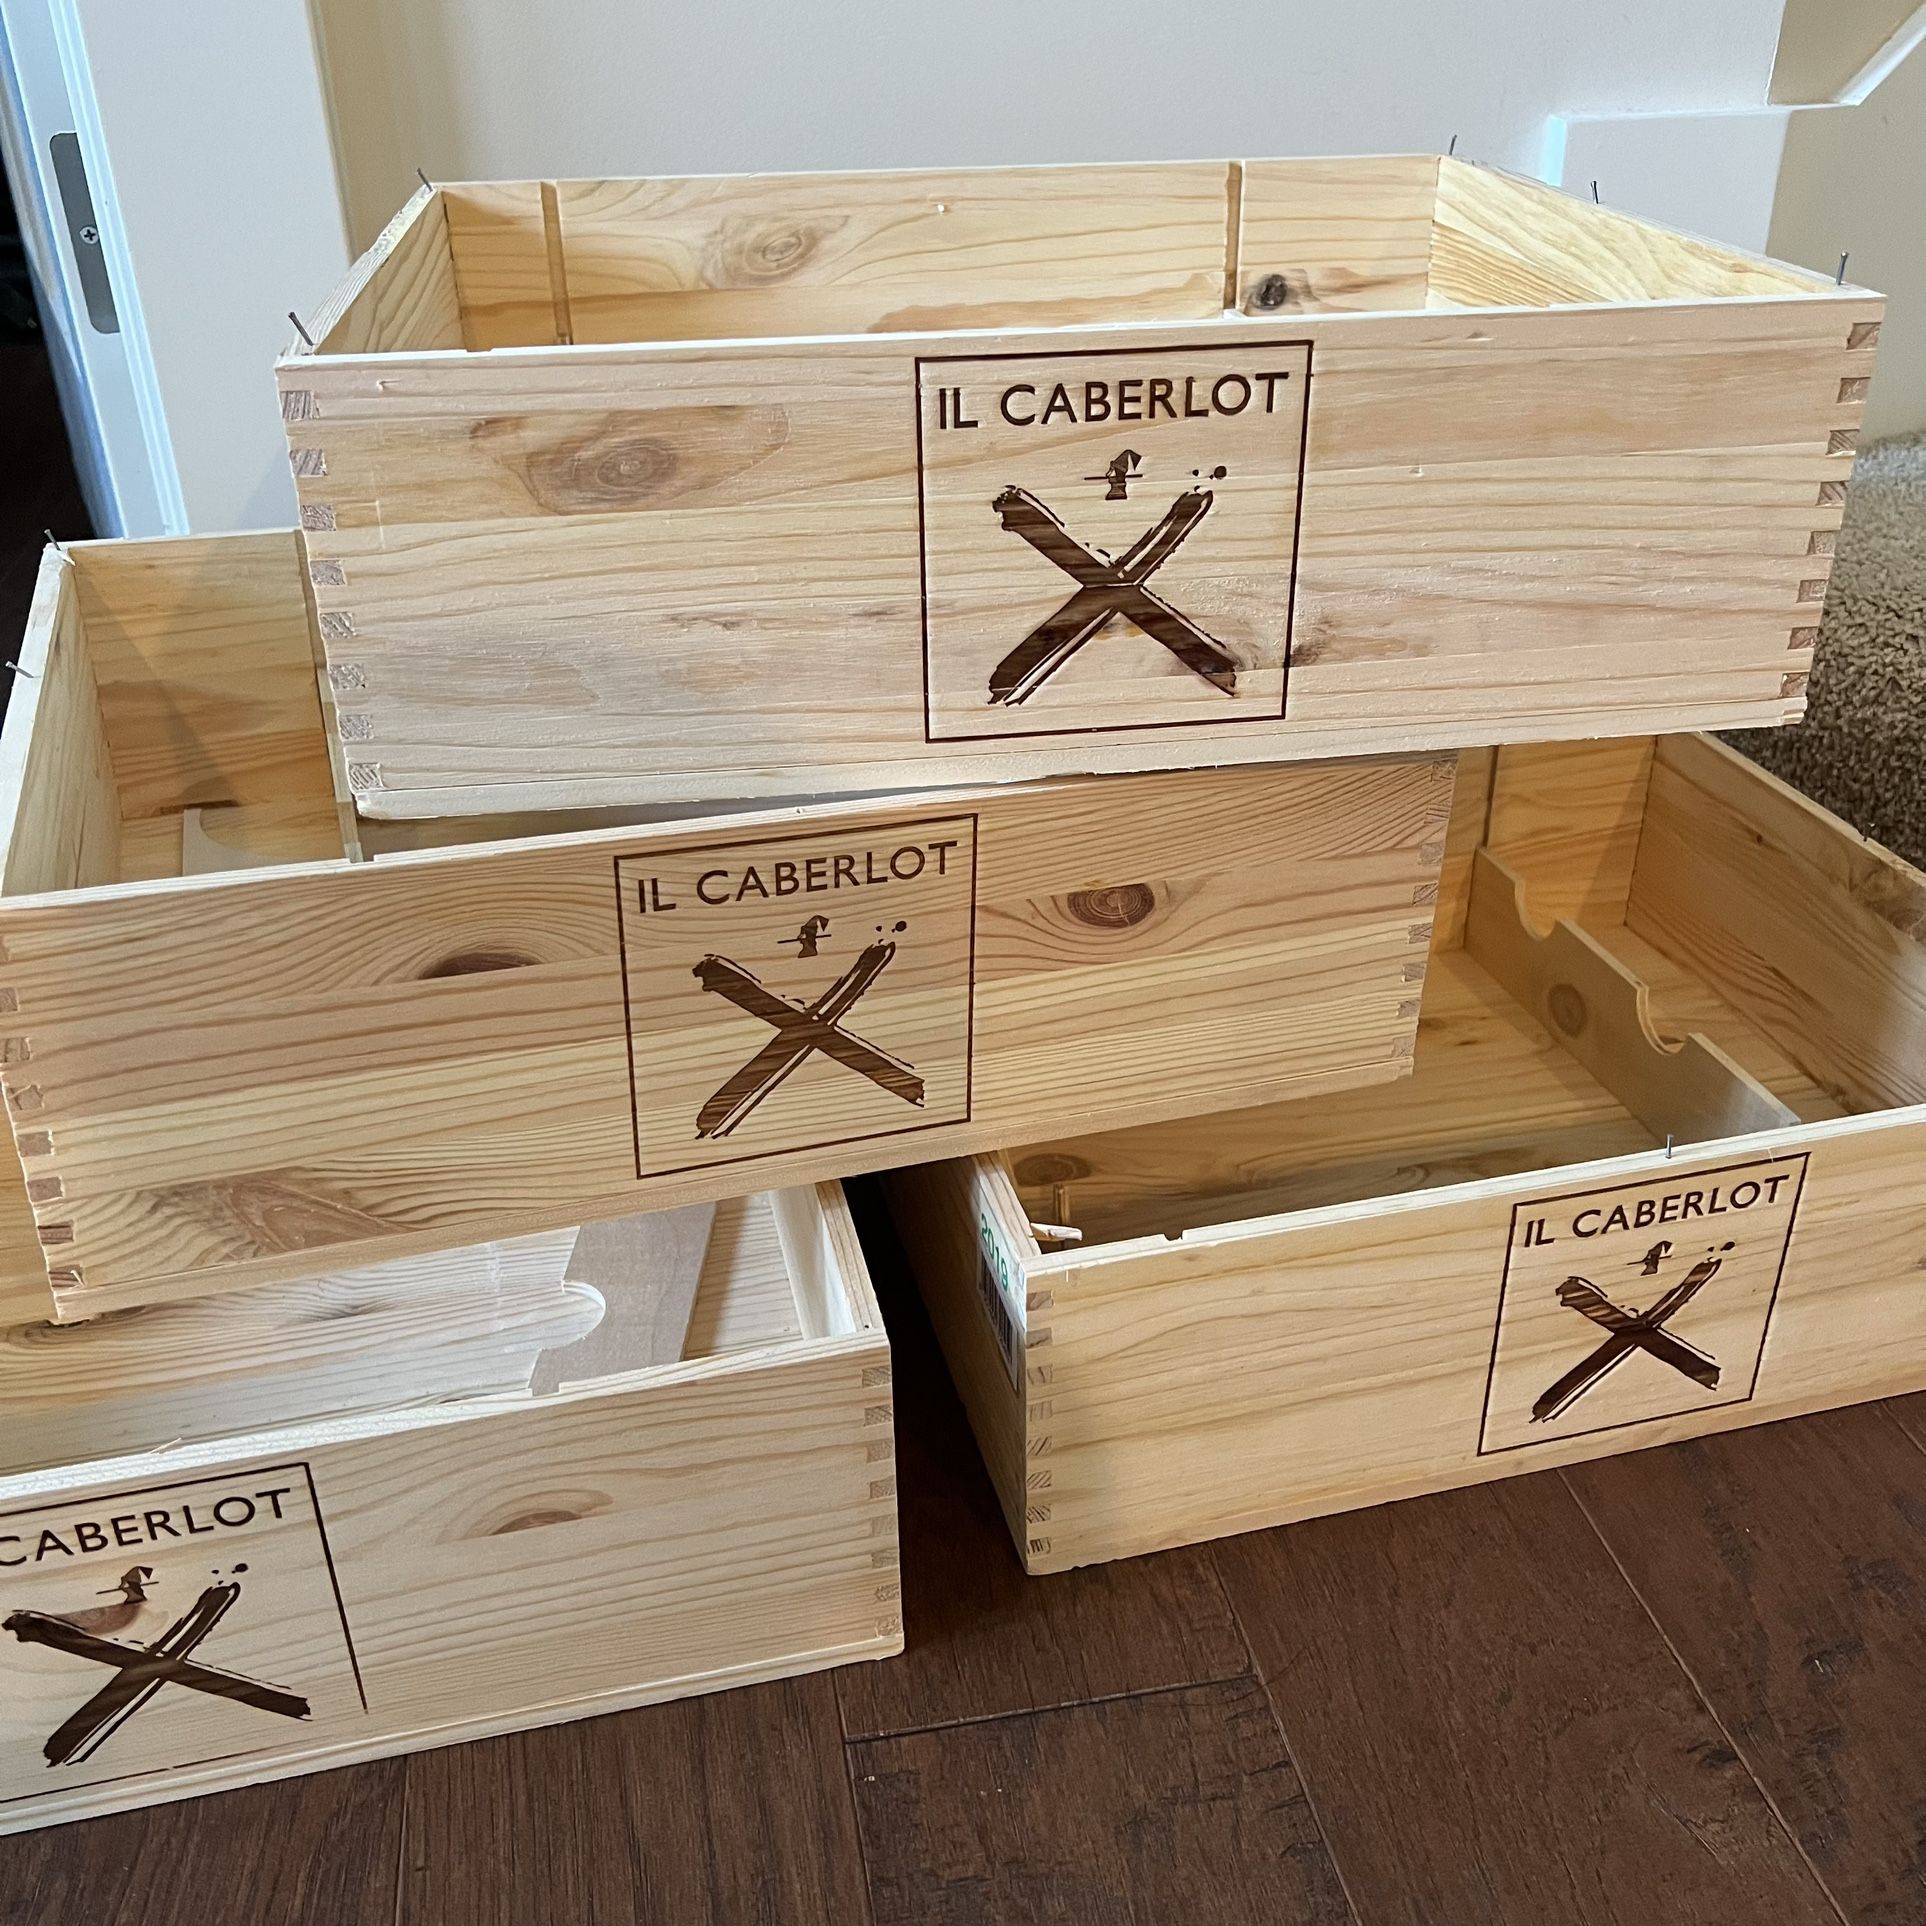 4 Medium Wooden Wine Crates Boxes For Craft Project Garden Planters Shelves